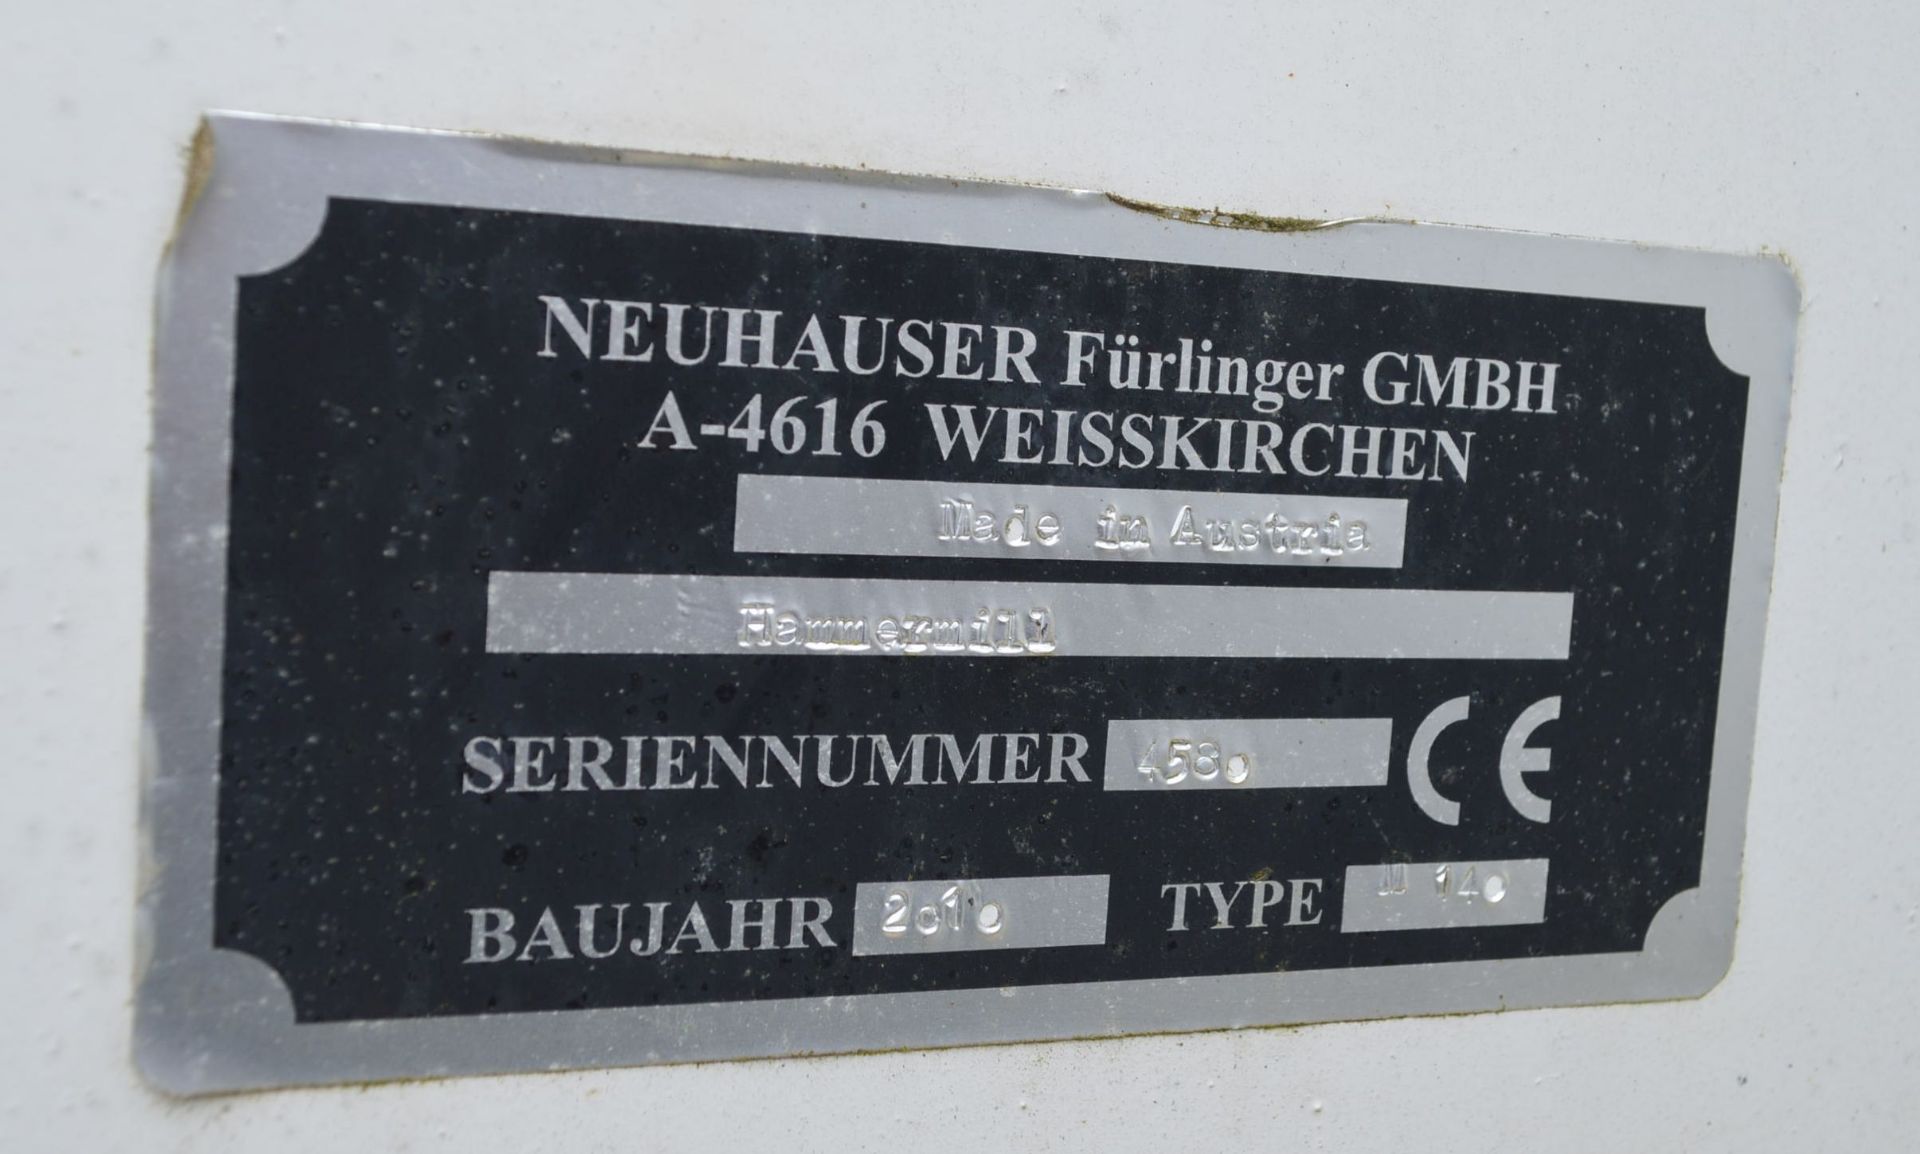 Neuhauser Furlinger M140 HAMMER MILL / Grinder, serial no. 4530, year of manufacture 2010, with - Image 4 of 7